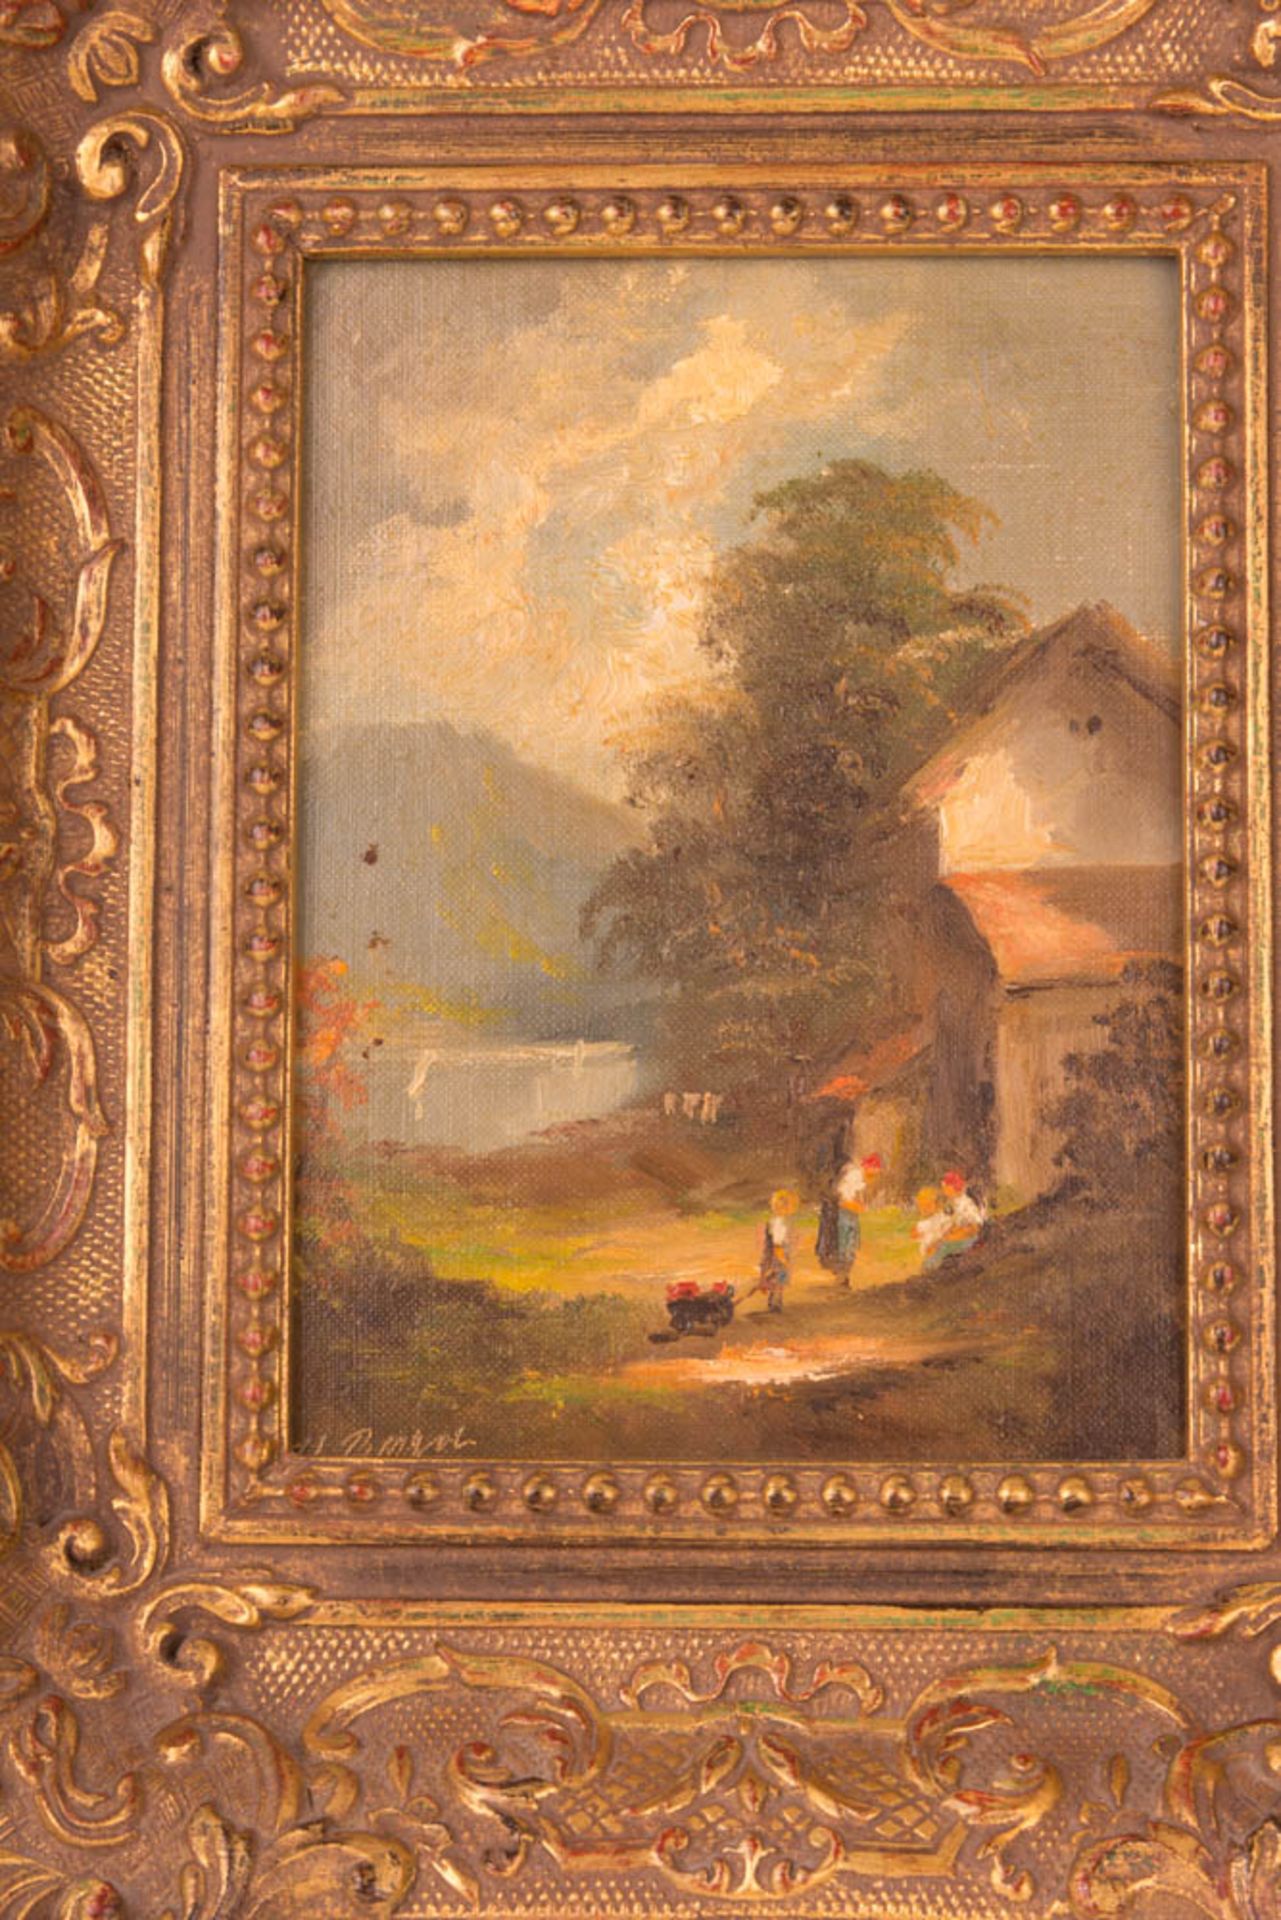 Heinrich Berger, domestic scene at the lake, oil on wood, 19th c. - Image 4 of 7